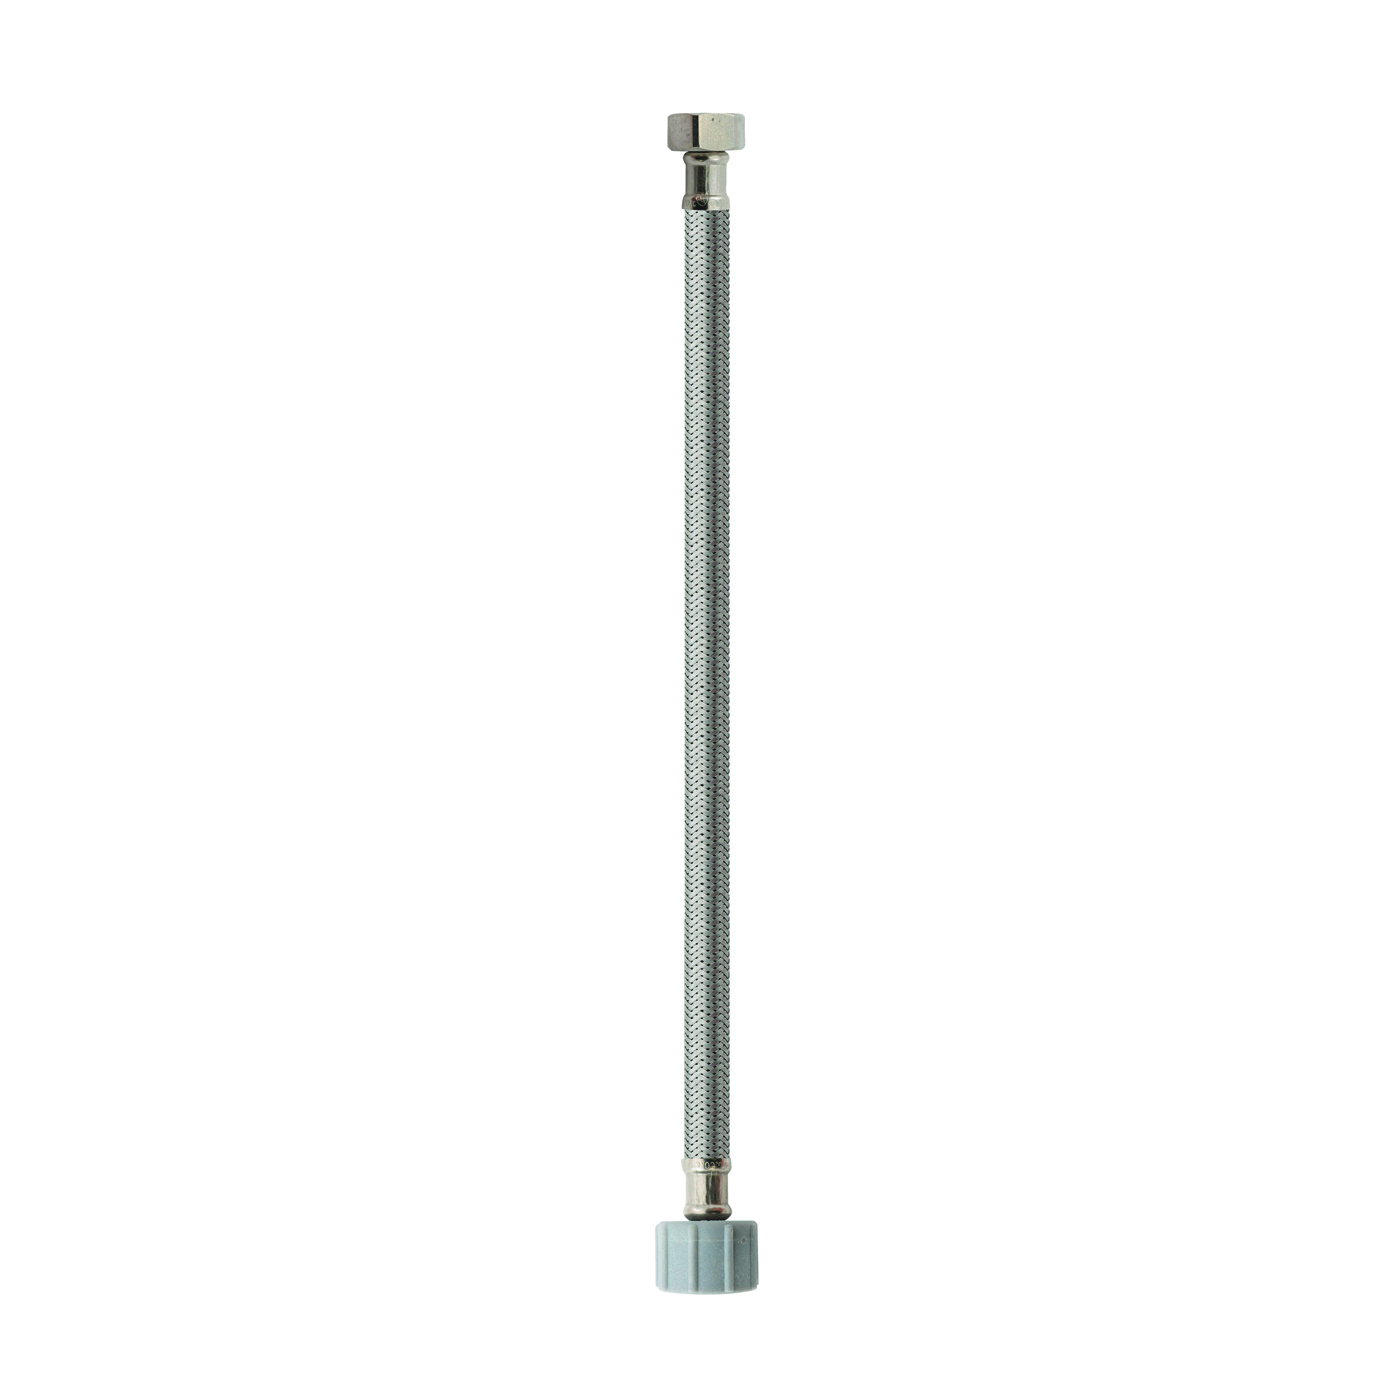 EZ Series PP23857 Toilet Supply Tube, 1/2 in Inlet, Flare Inlet, 7/8 in Outlet, Ballcock Outlet, Stainless Steel, 20 in L